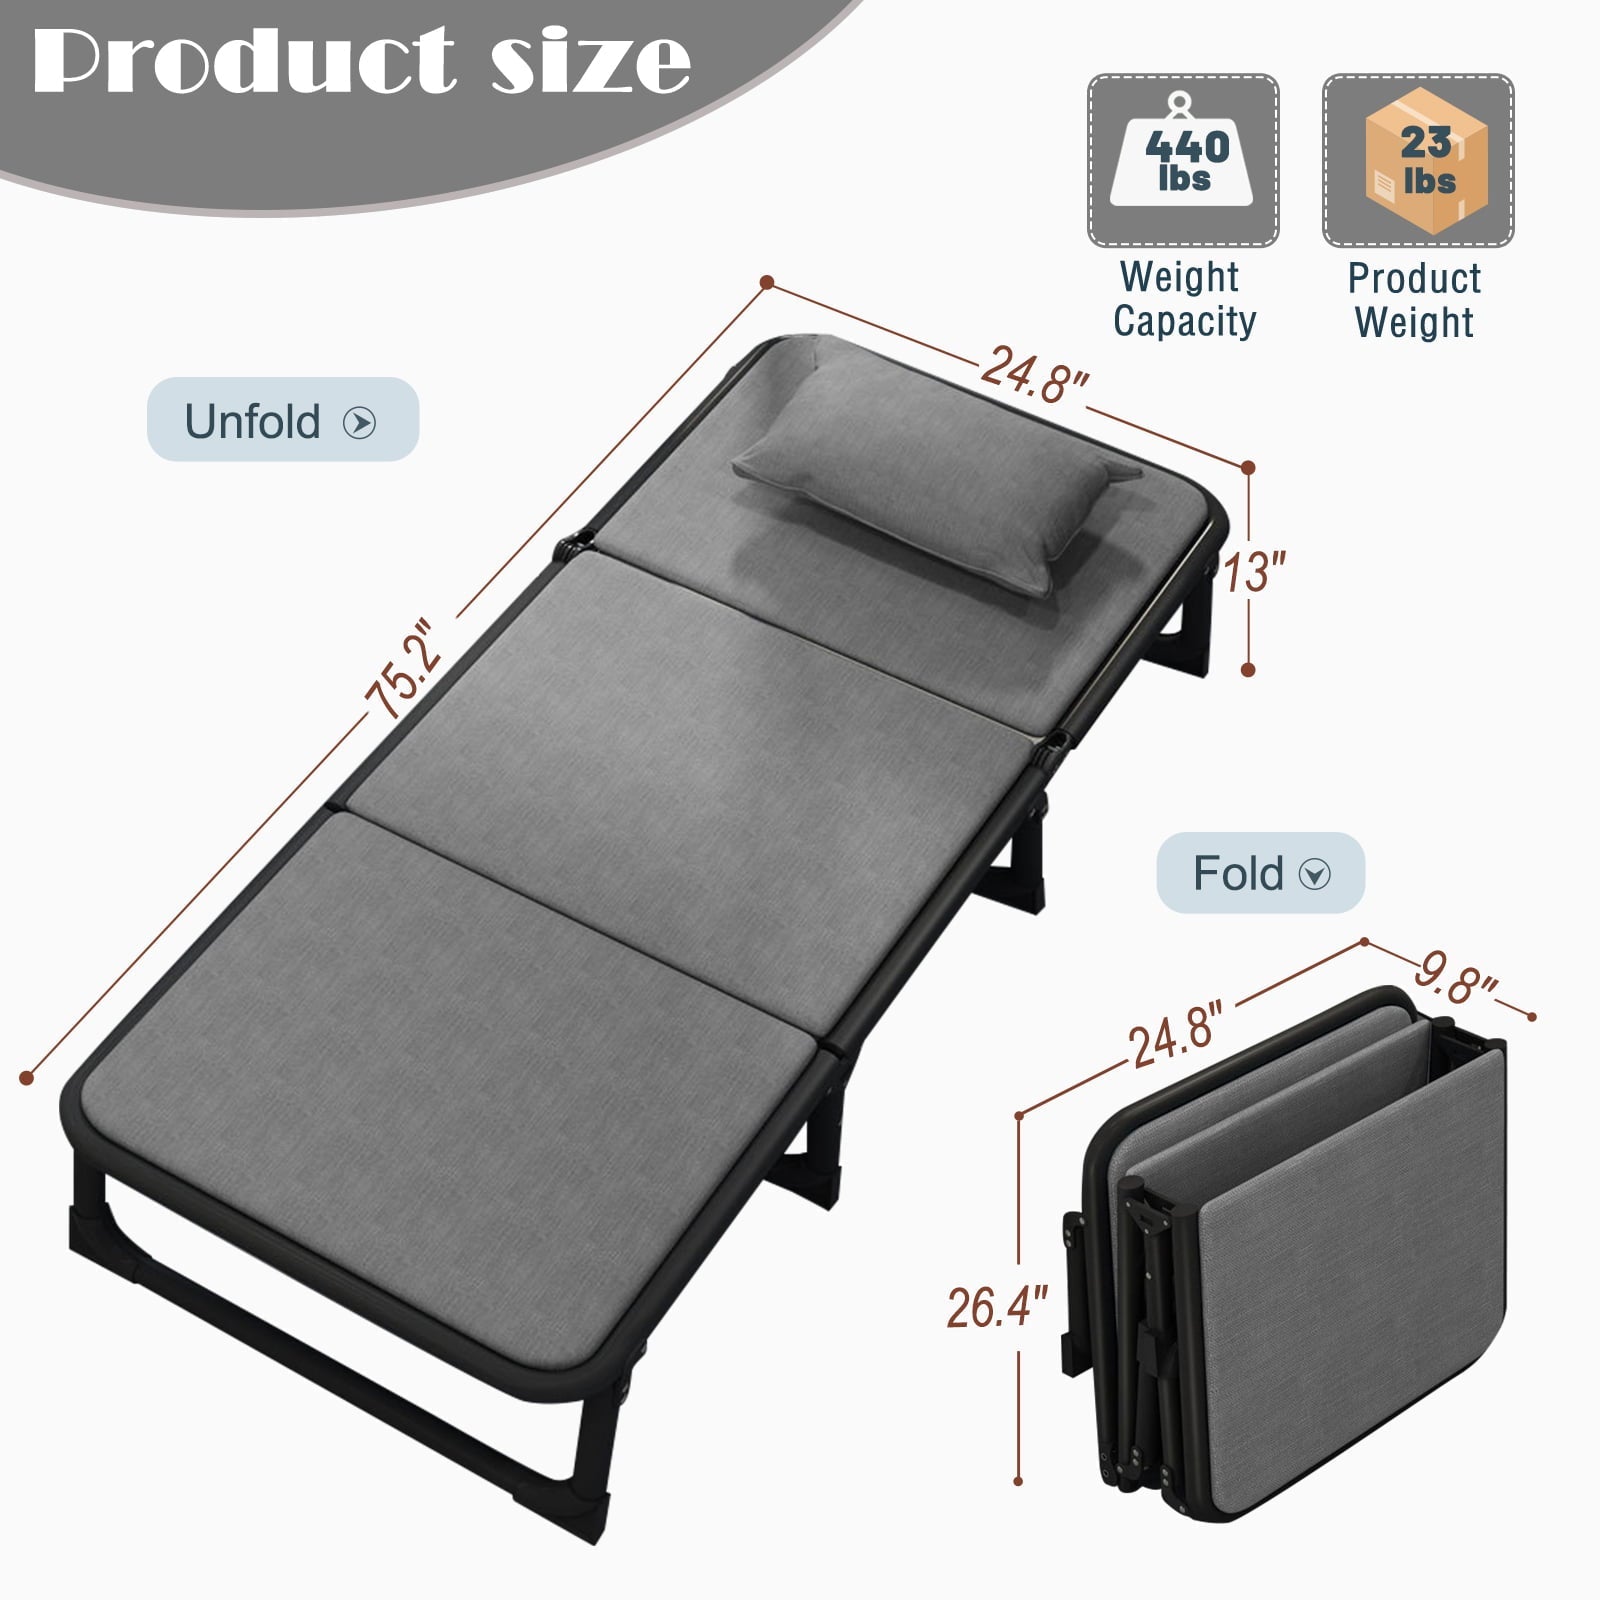 MOPHOTO Folding Bed Cot with Mattress, Portable Beds Frame with Mattress, Portable Fold Up Bed for Outdoor Travel, Foldable Bed with Frame, Sleeping Bed Cot for Adults, Gray